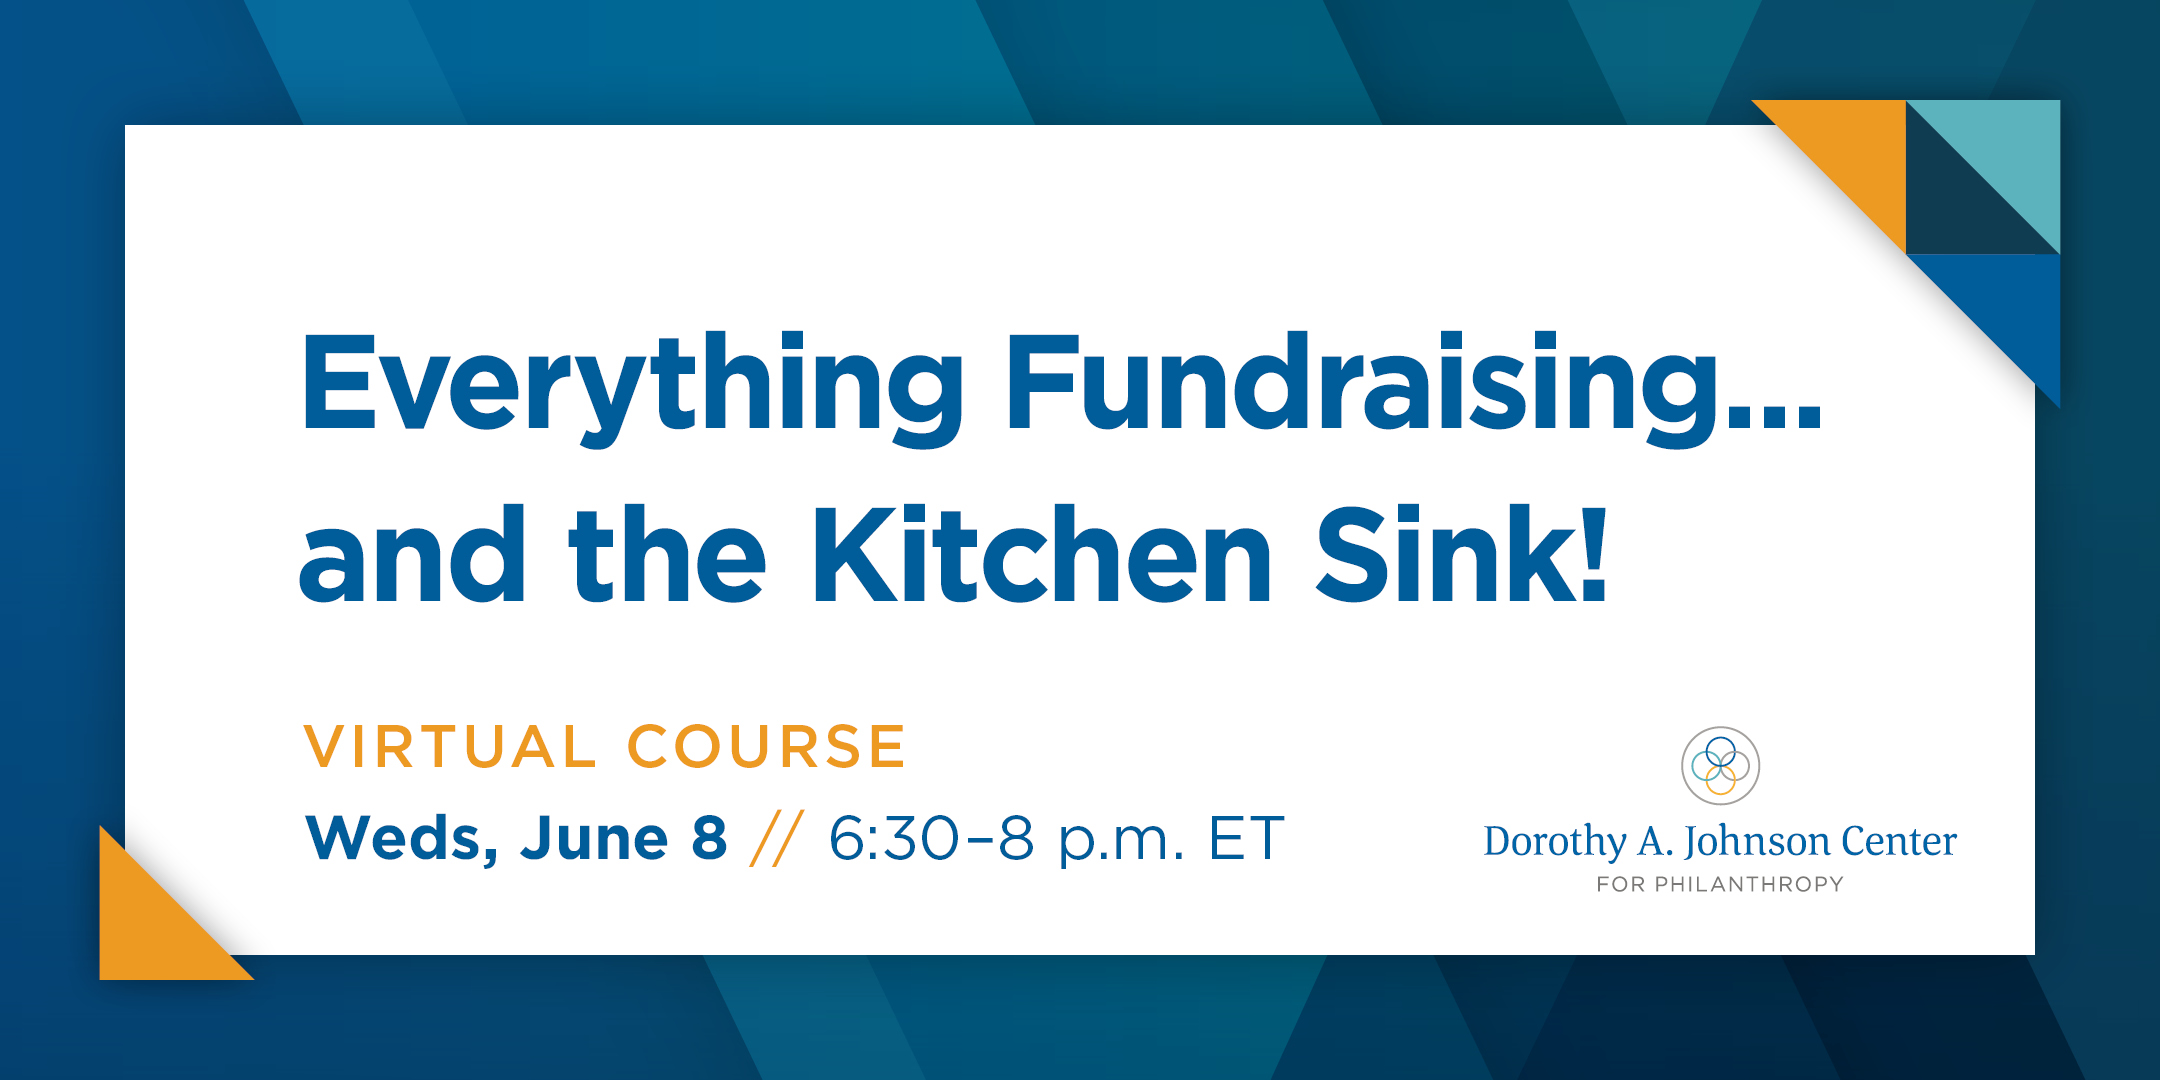 Everything Fundraising... and the Kitchen Sink!